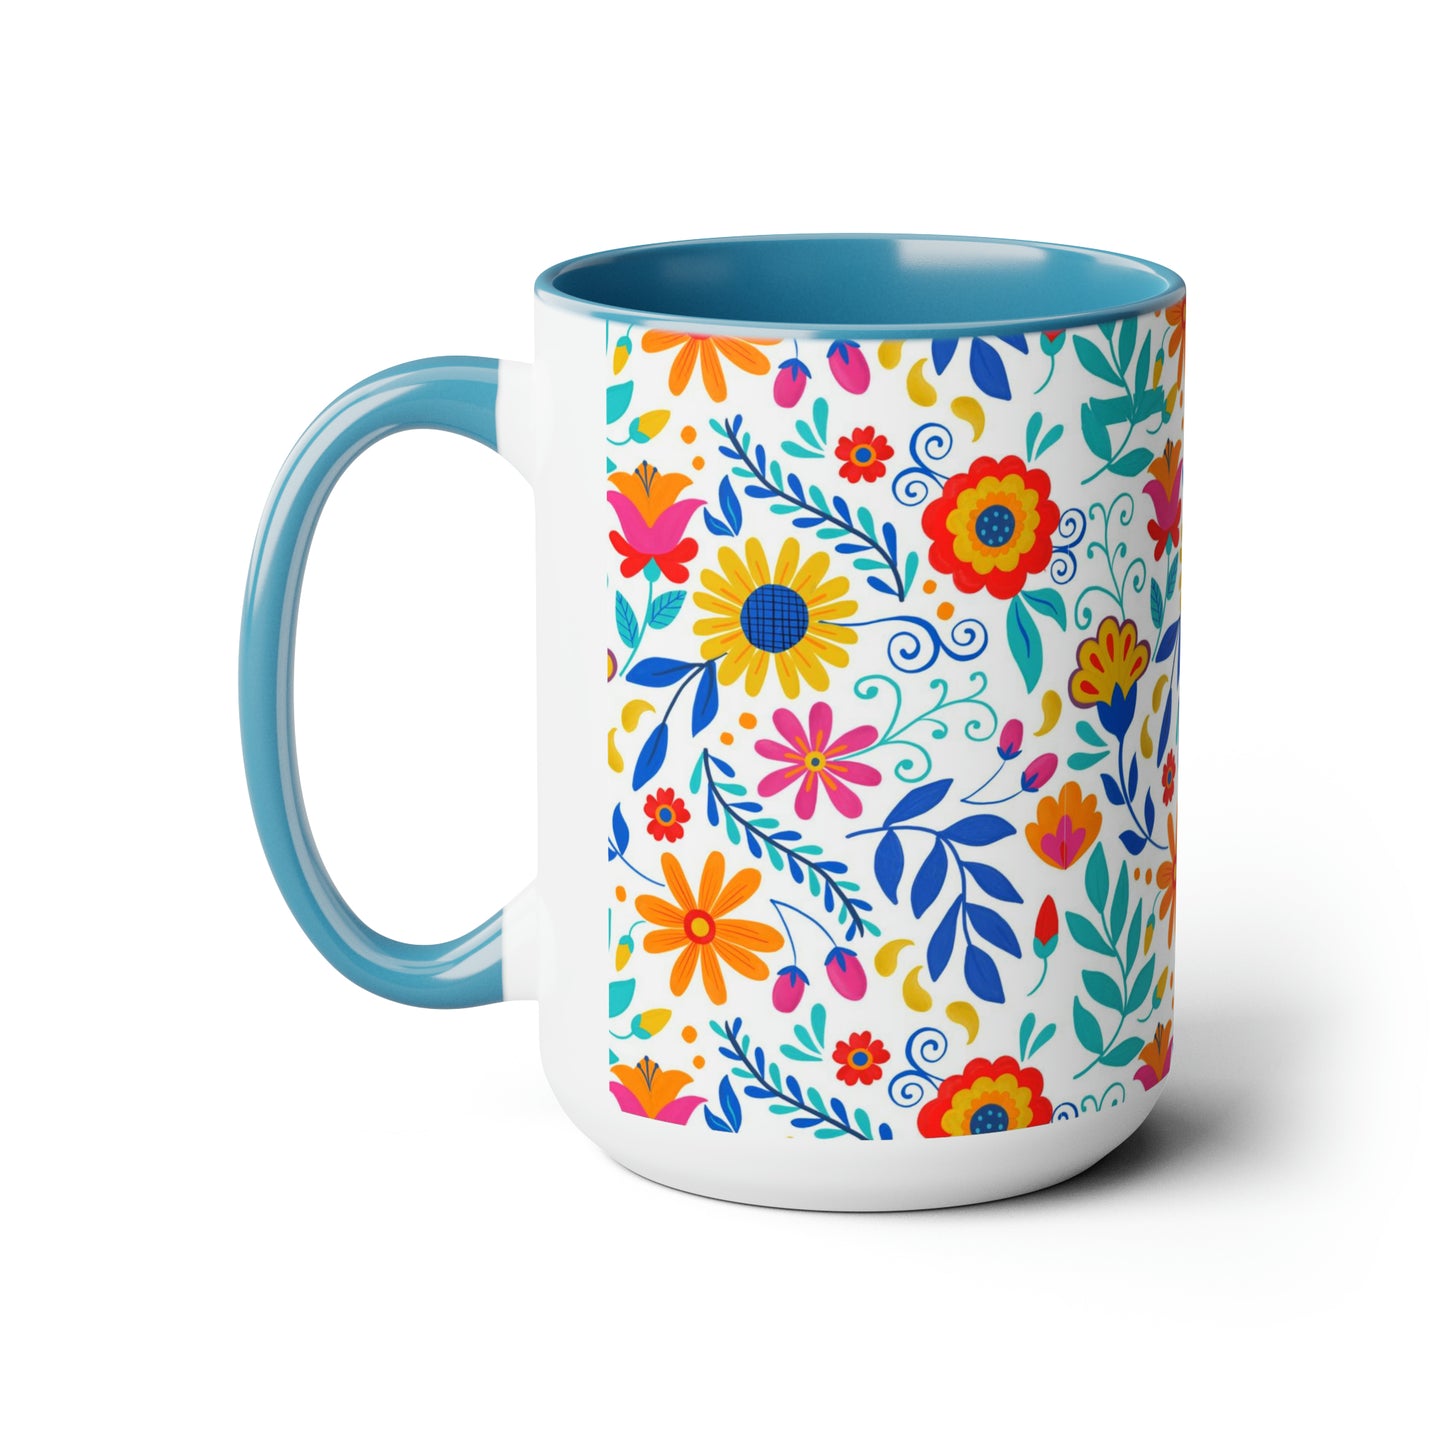 Mexican flowers Coffee Mugs, 15oz for mom or friends. Floral gift for her. Mexican folk art with flowers and leaves.